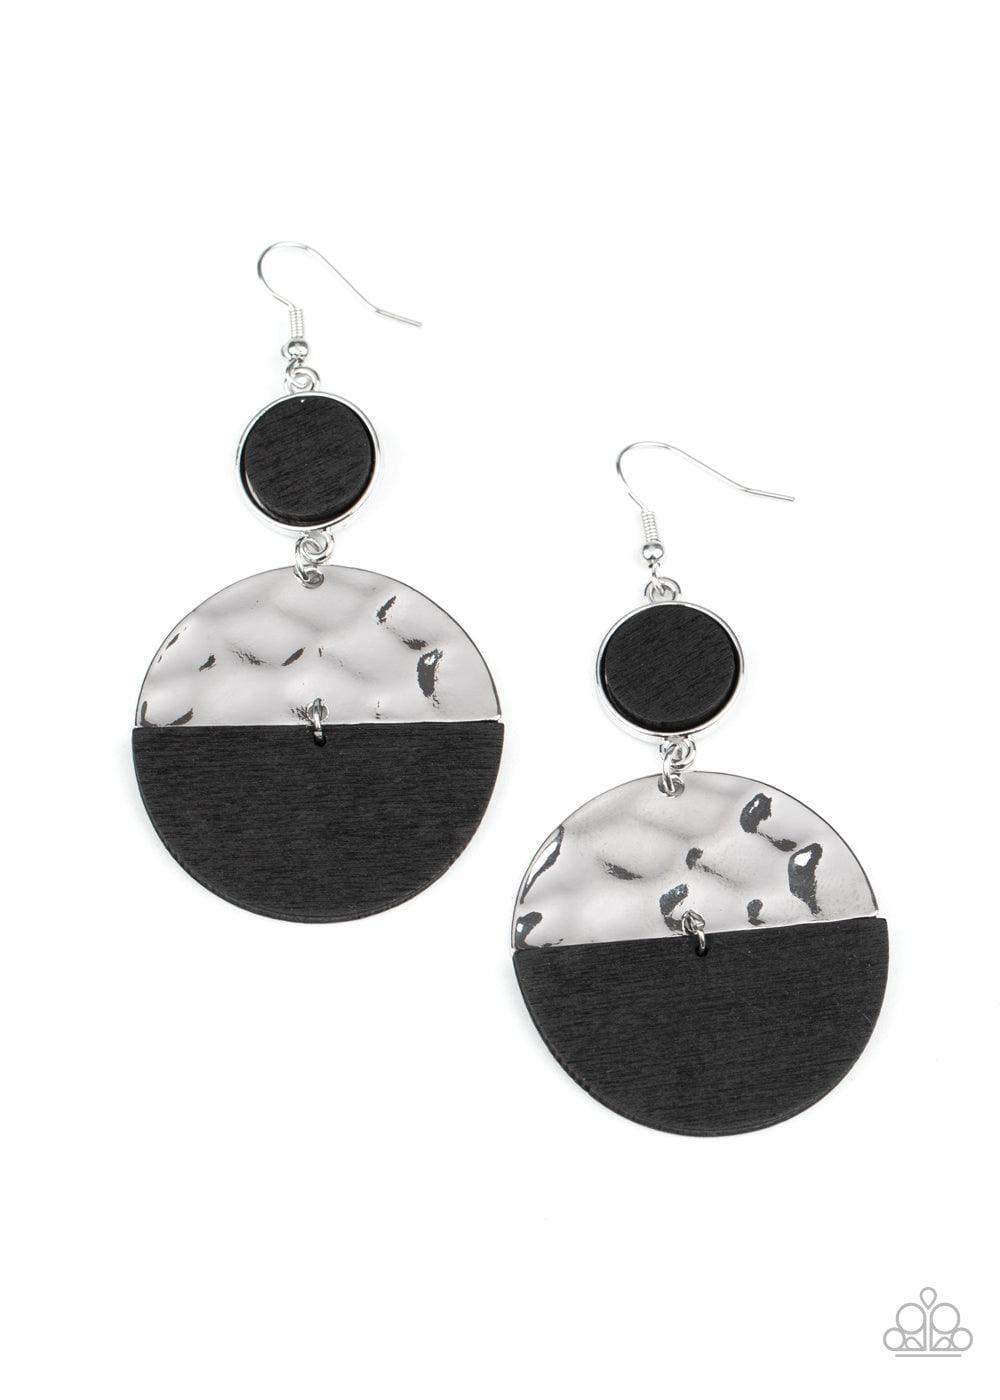 Paparazzi Accessories - Natural Element - Black Earrings - Bling by JessieK